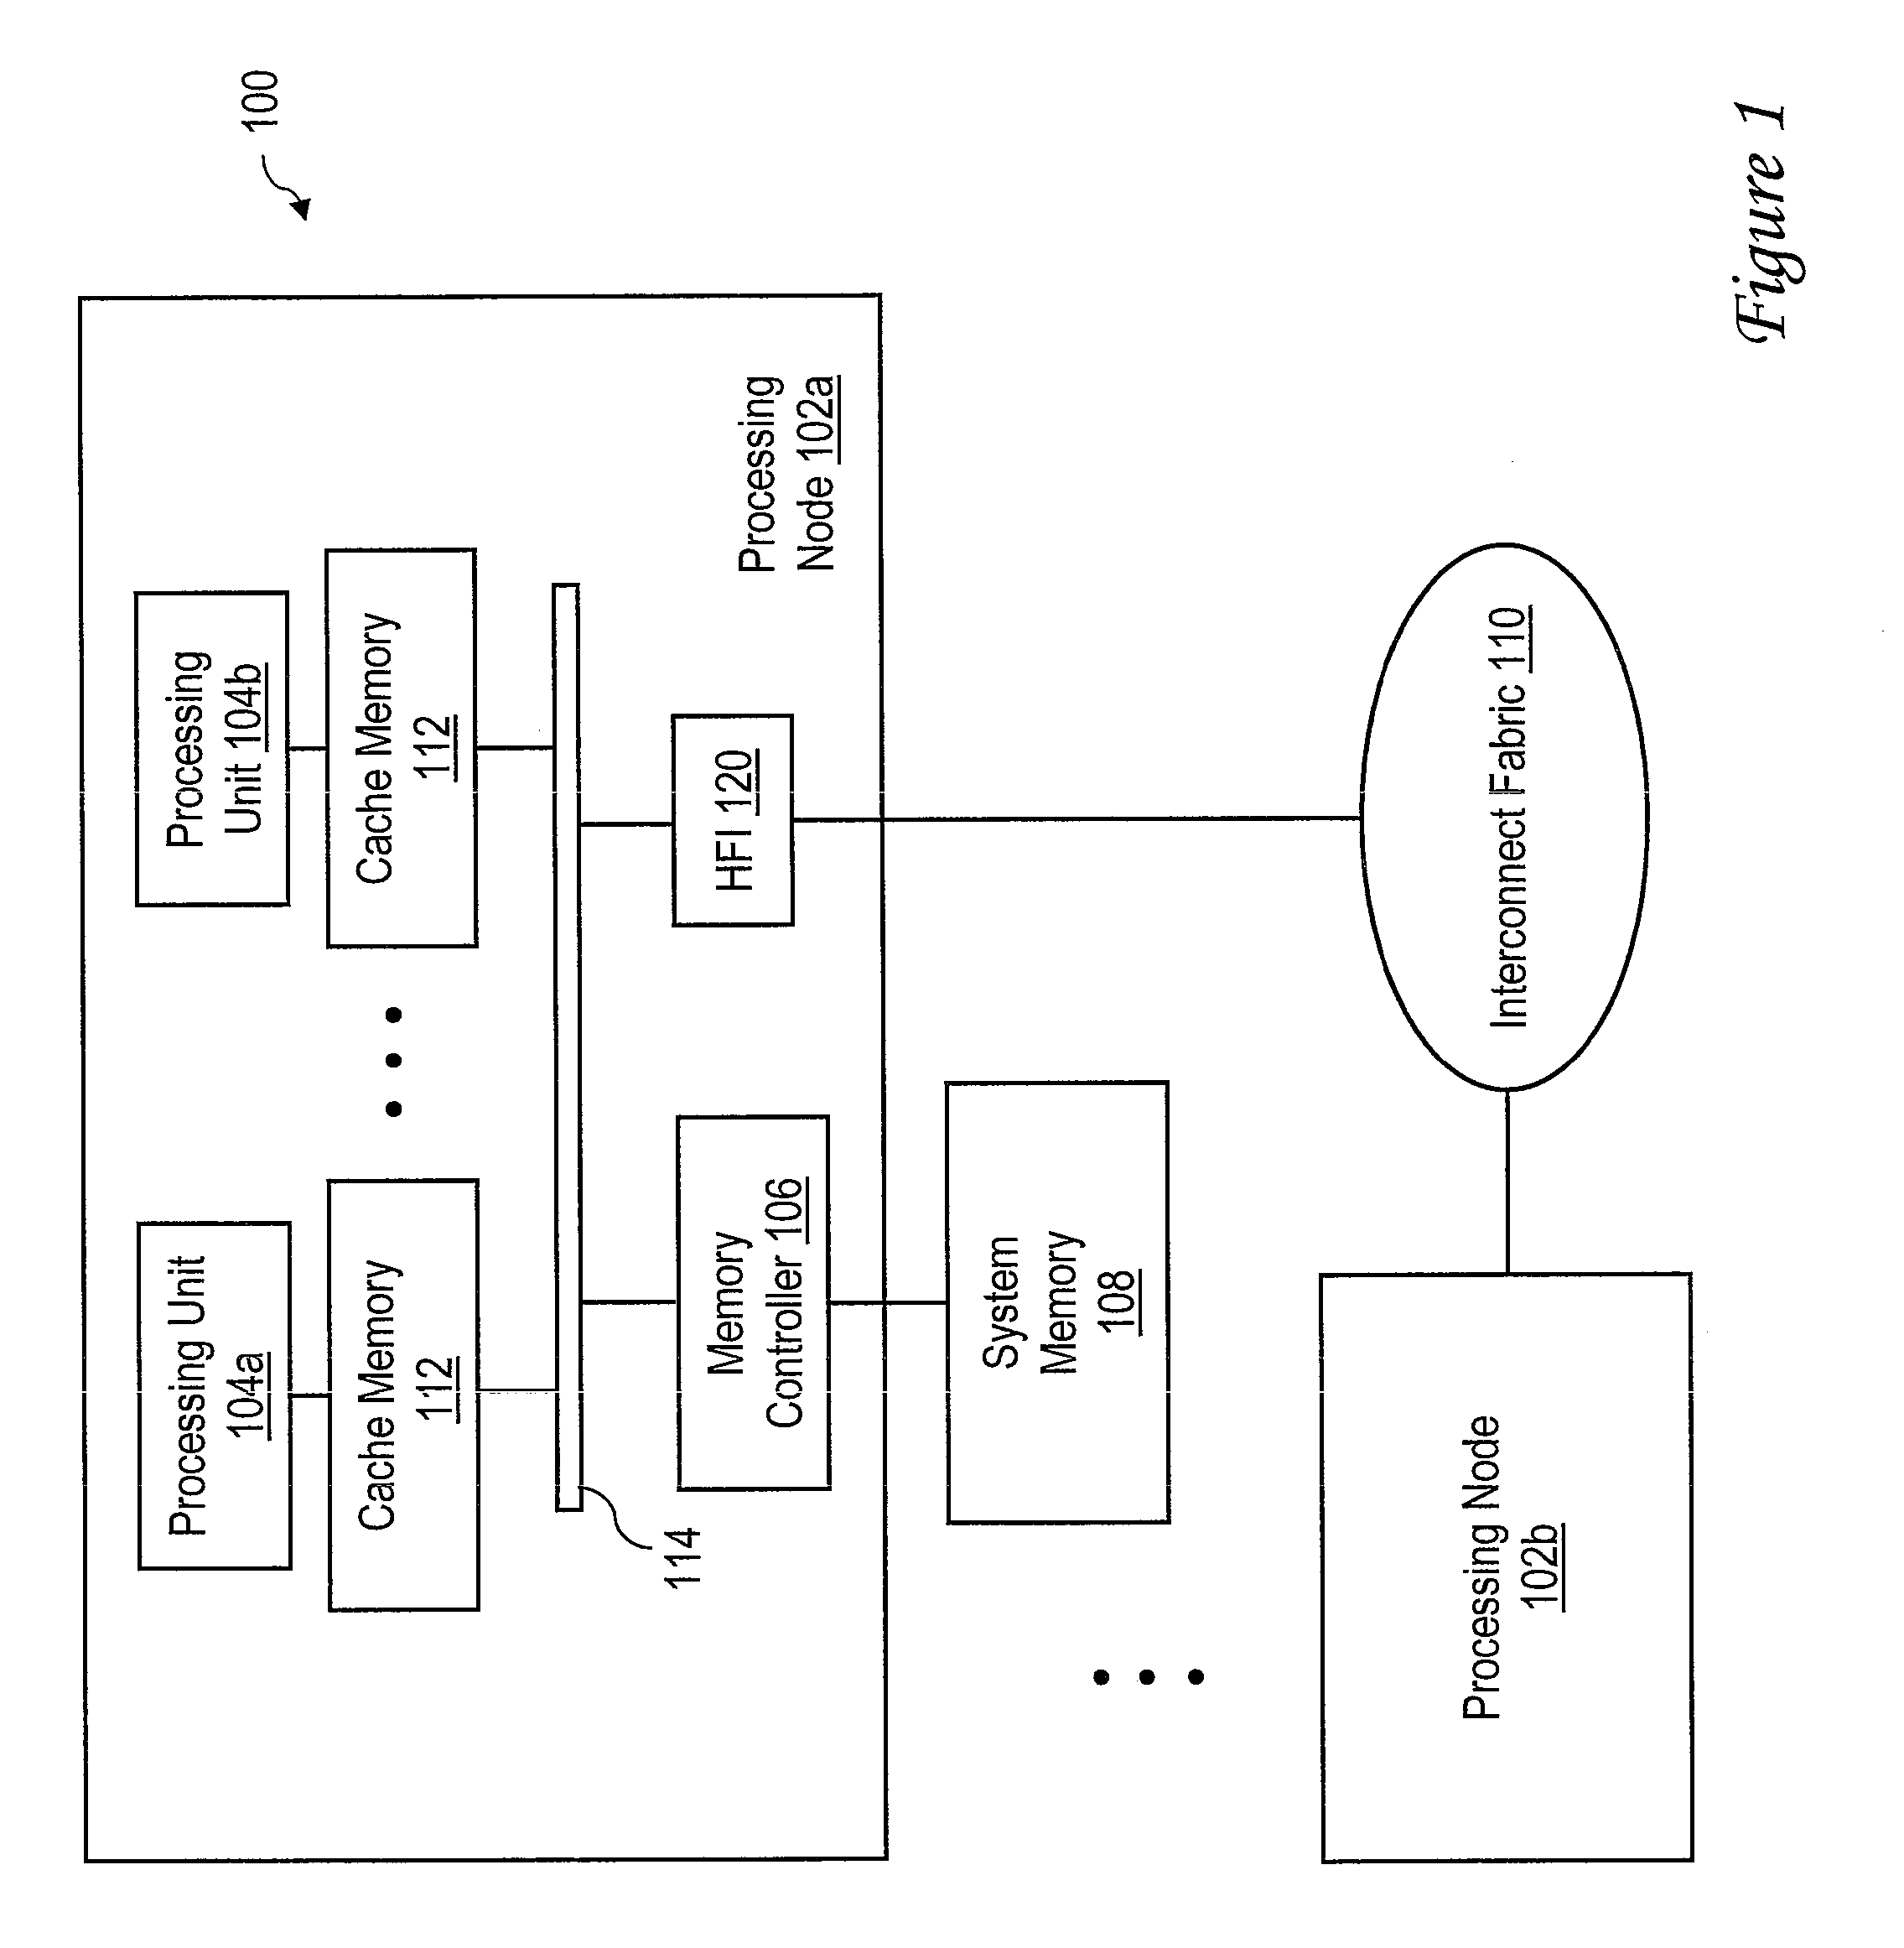 Method, System and Program Product for Reserving a Global Address Space